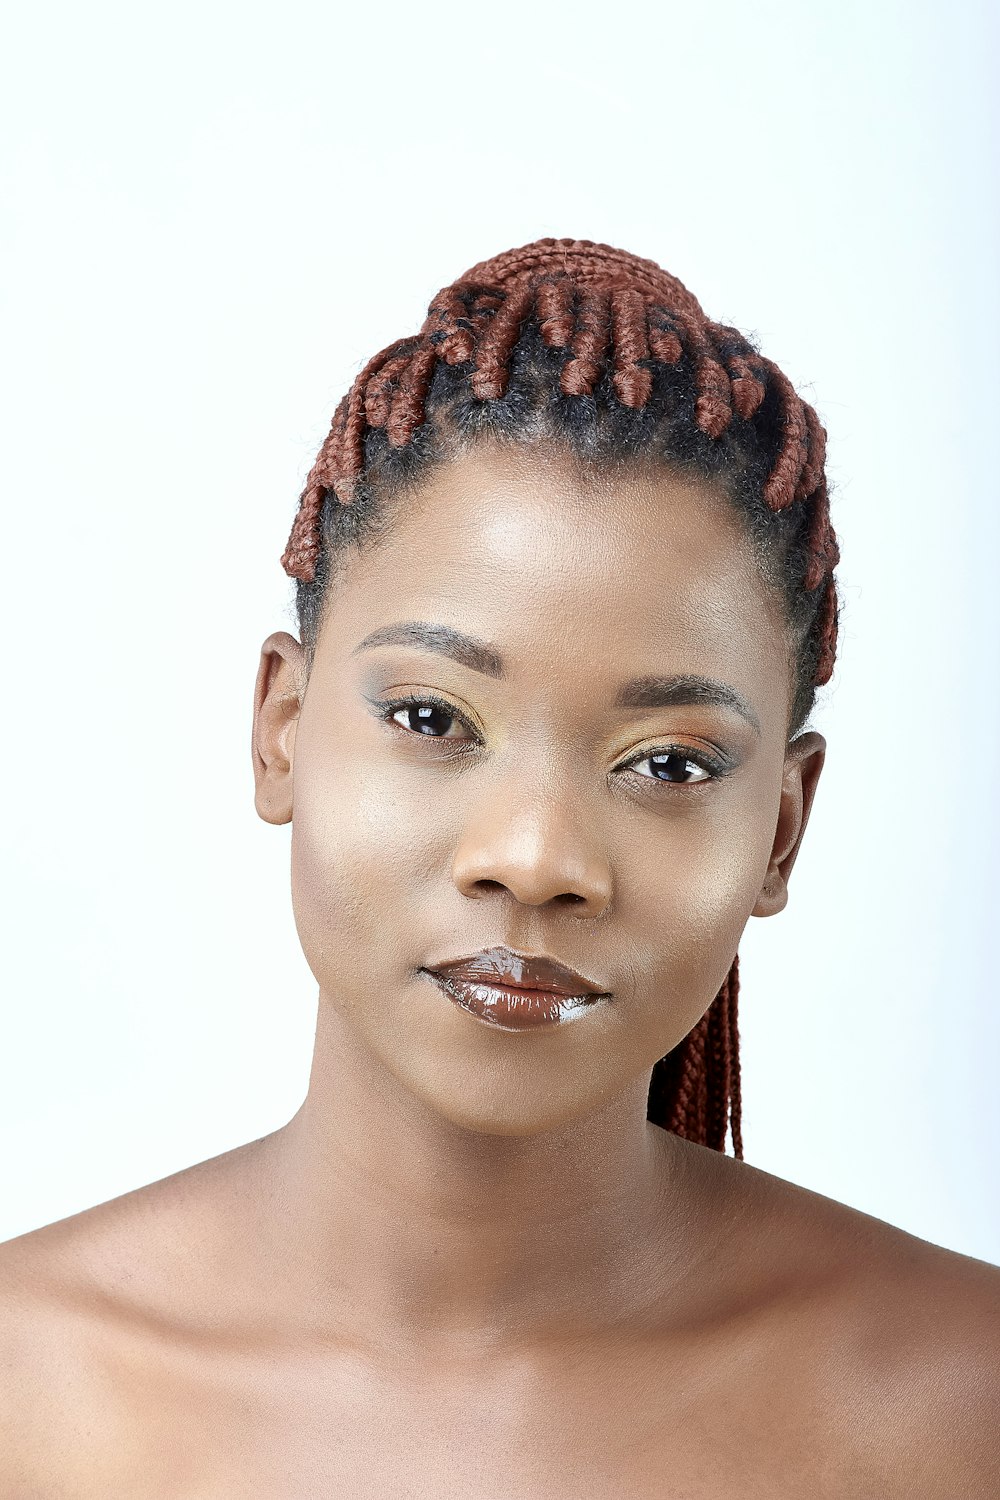 a woman with braids on her hair posing for a picture